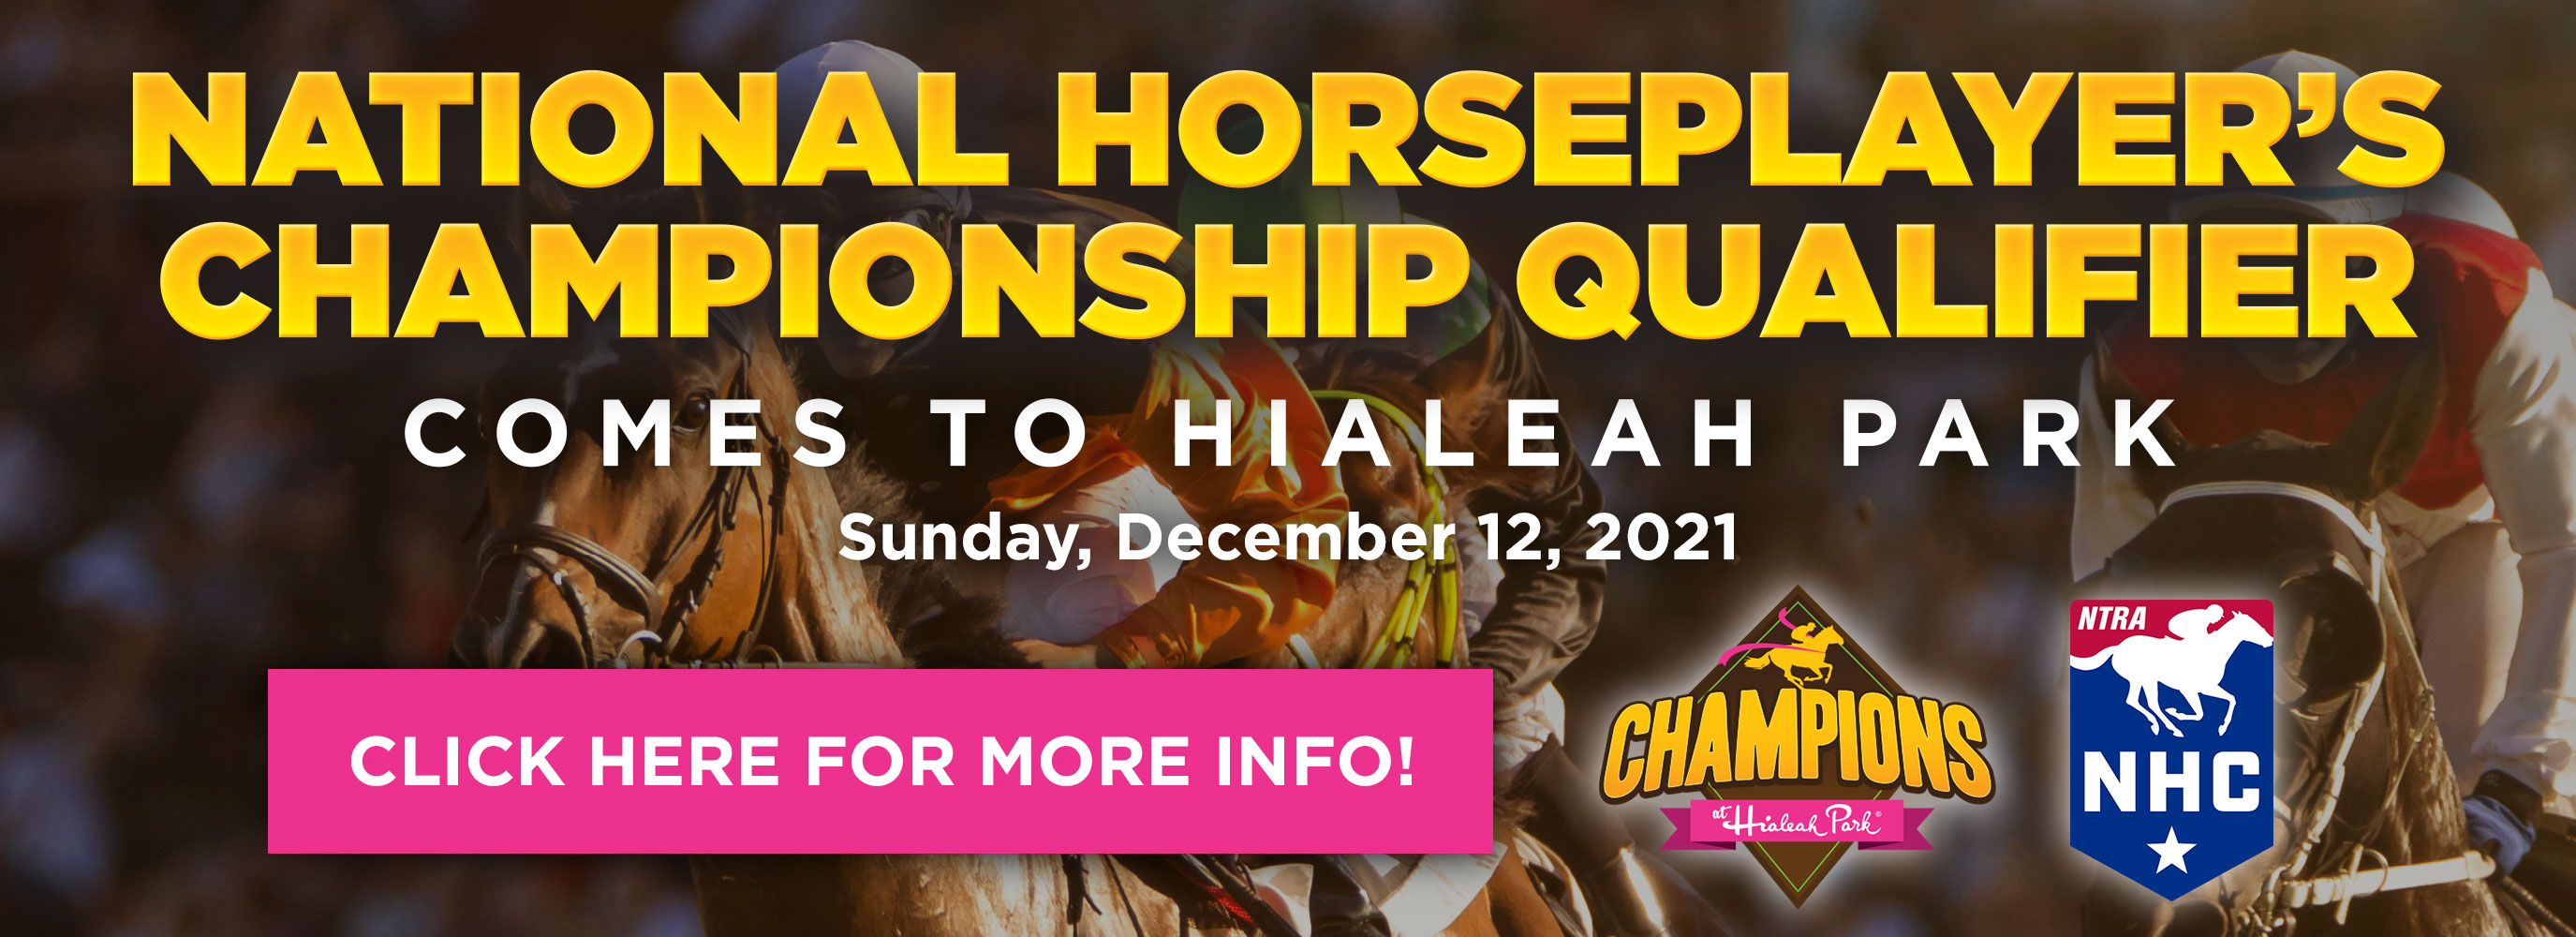 National Horseplayer's Championship Qualifier comes to Hialeah Park - Sunday, December 12, 2021 - Click here for more info!